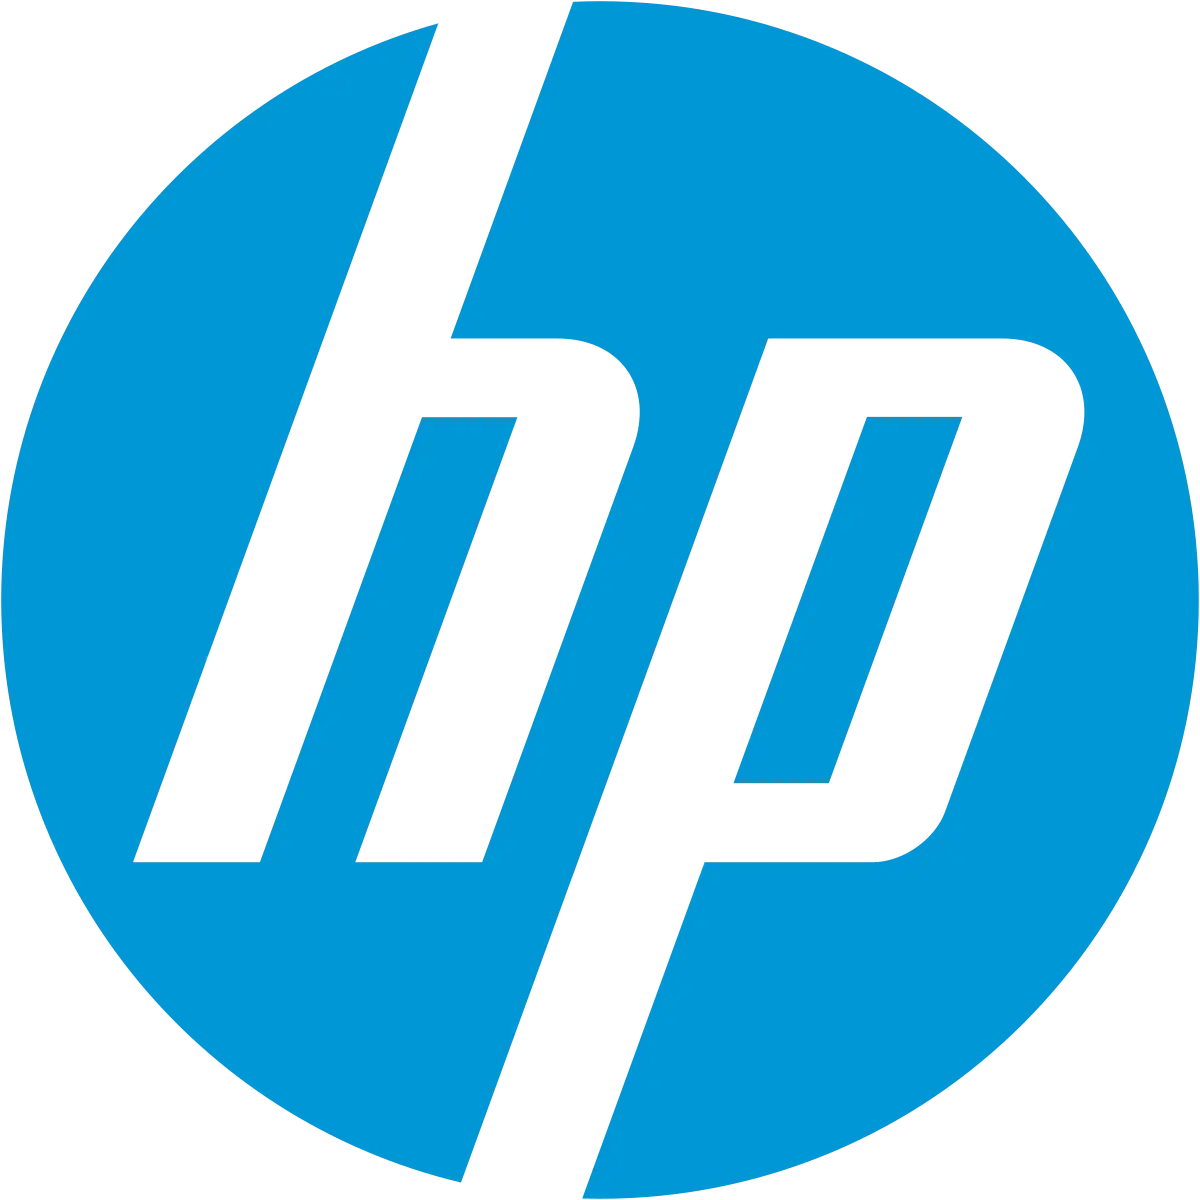 Peregrine systems acquired by hewlett-packard: a strategic move in rf technology